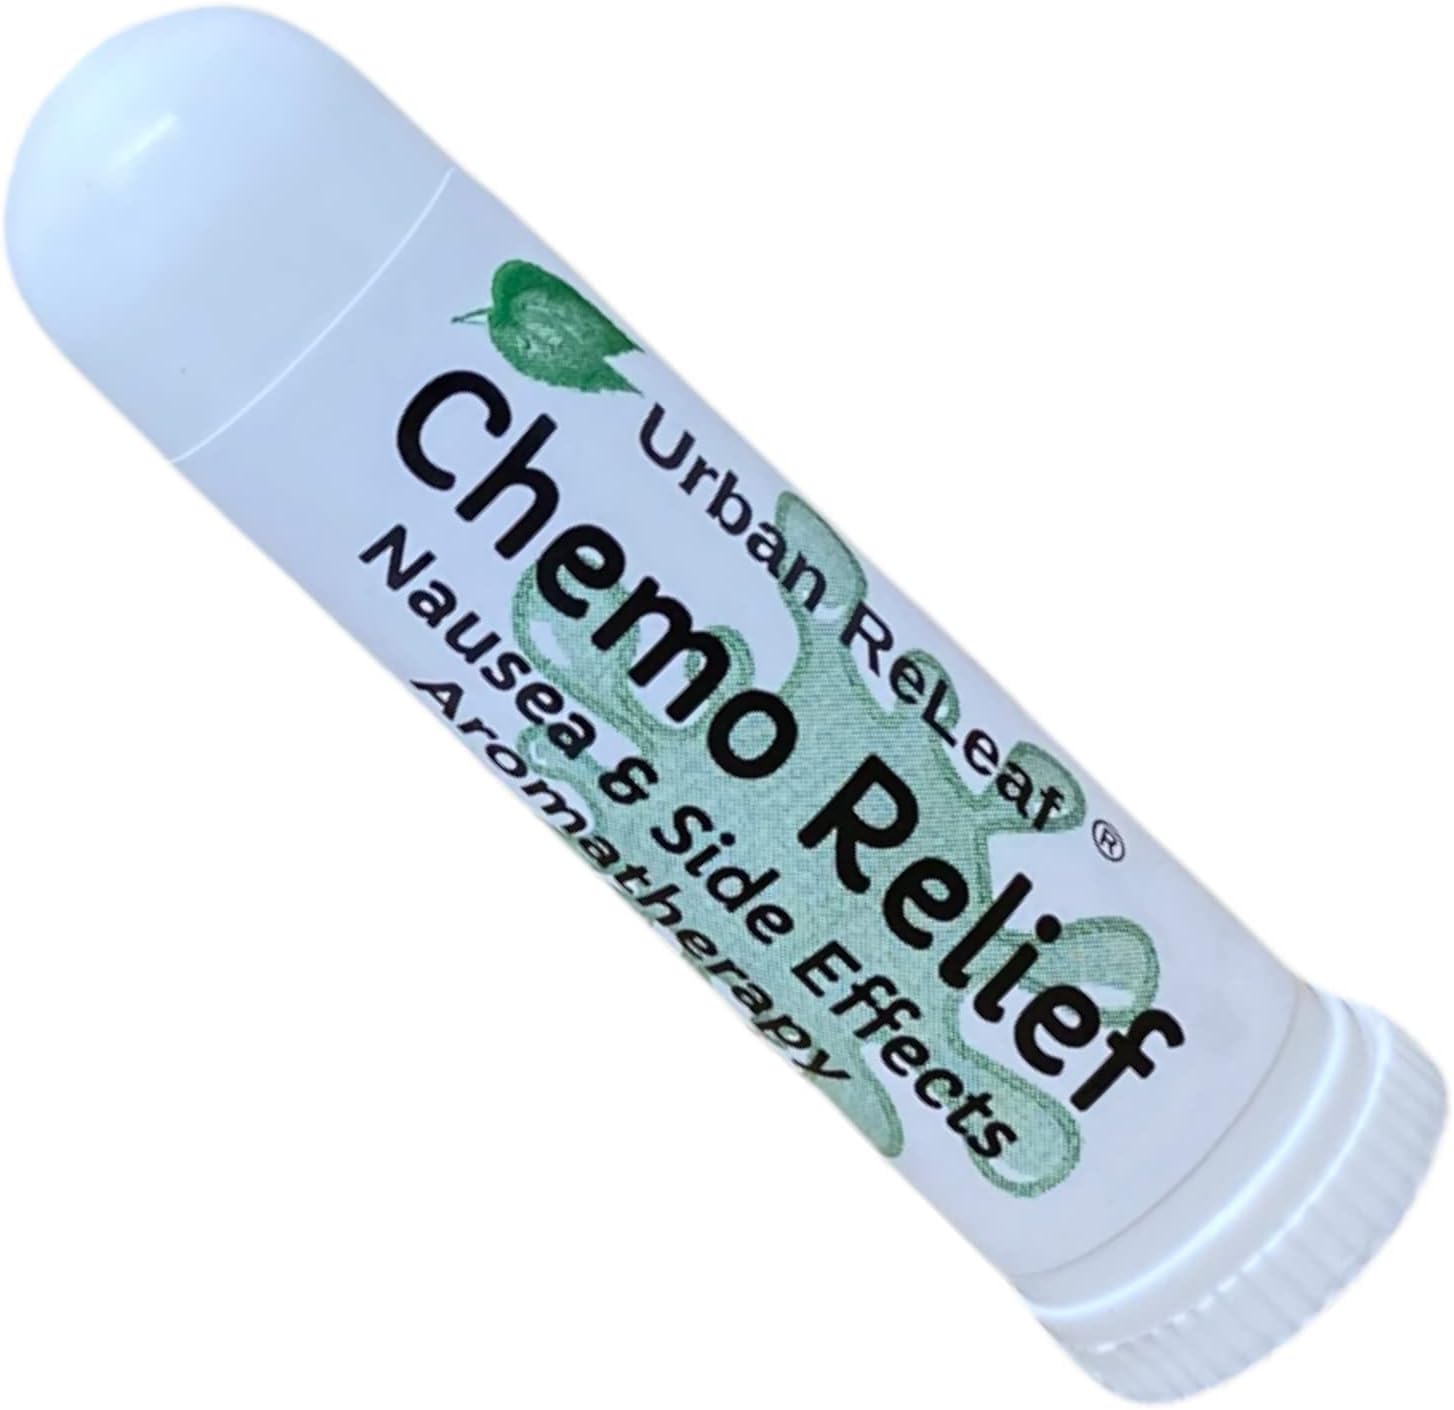 Urban ReLeaf Chemo Relief Nausea & Side Effects [...]